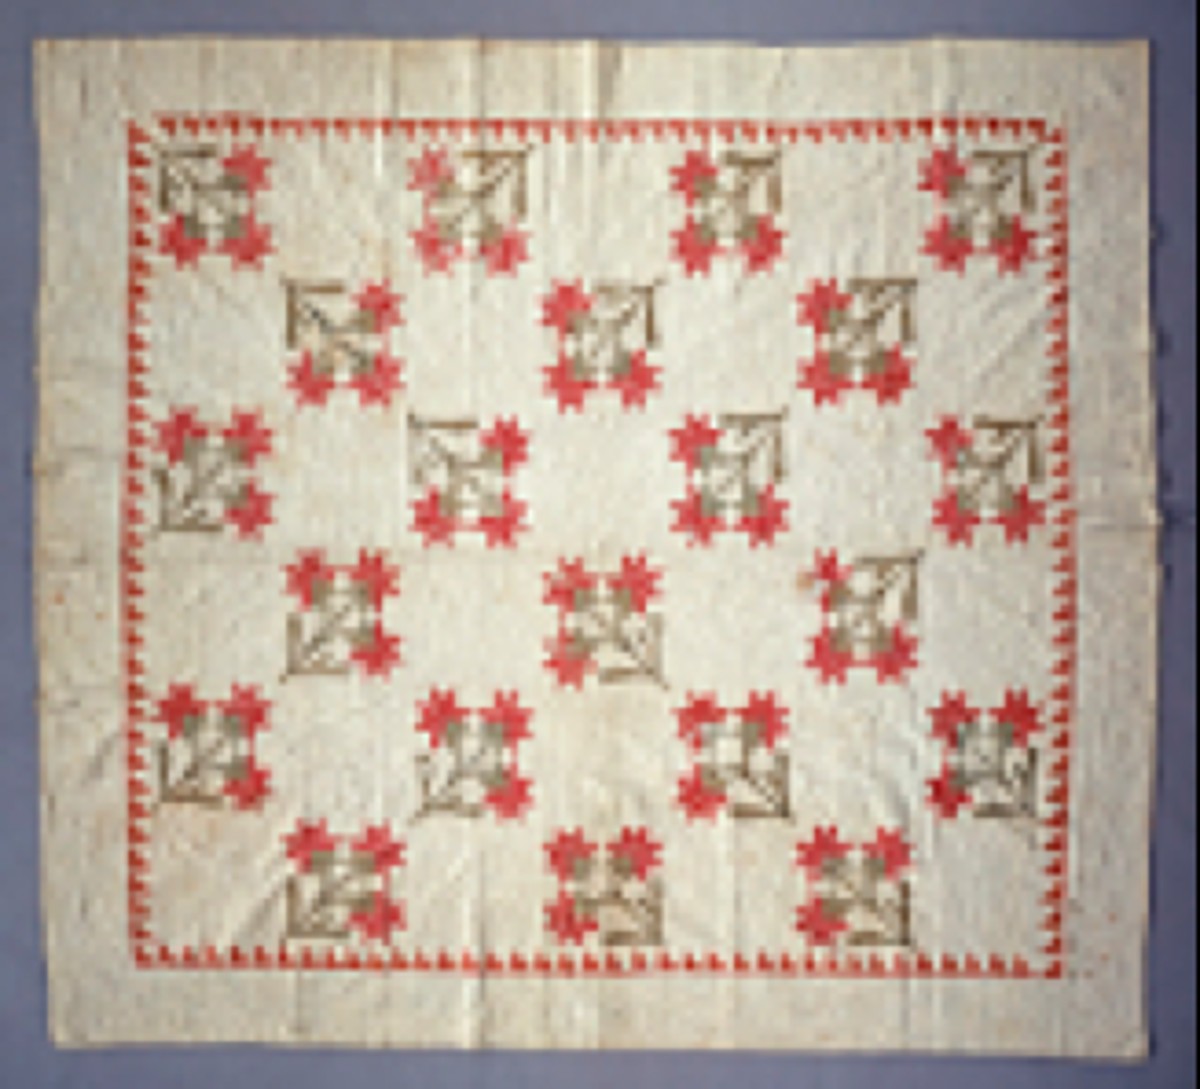 This Lily quilt made by Lovettsville women is in the National Museum of American History